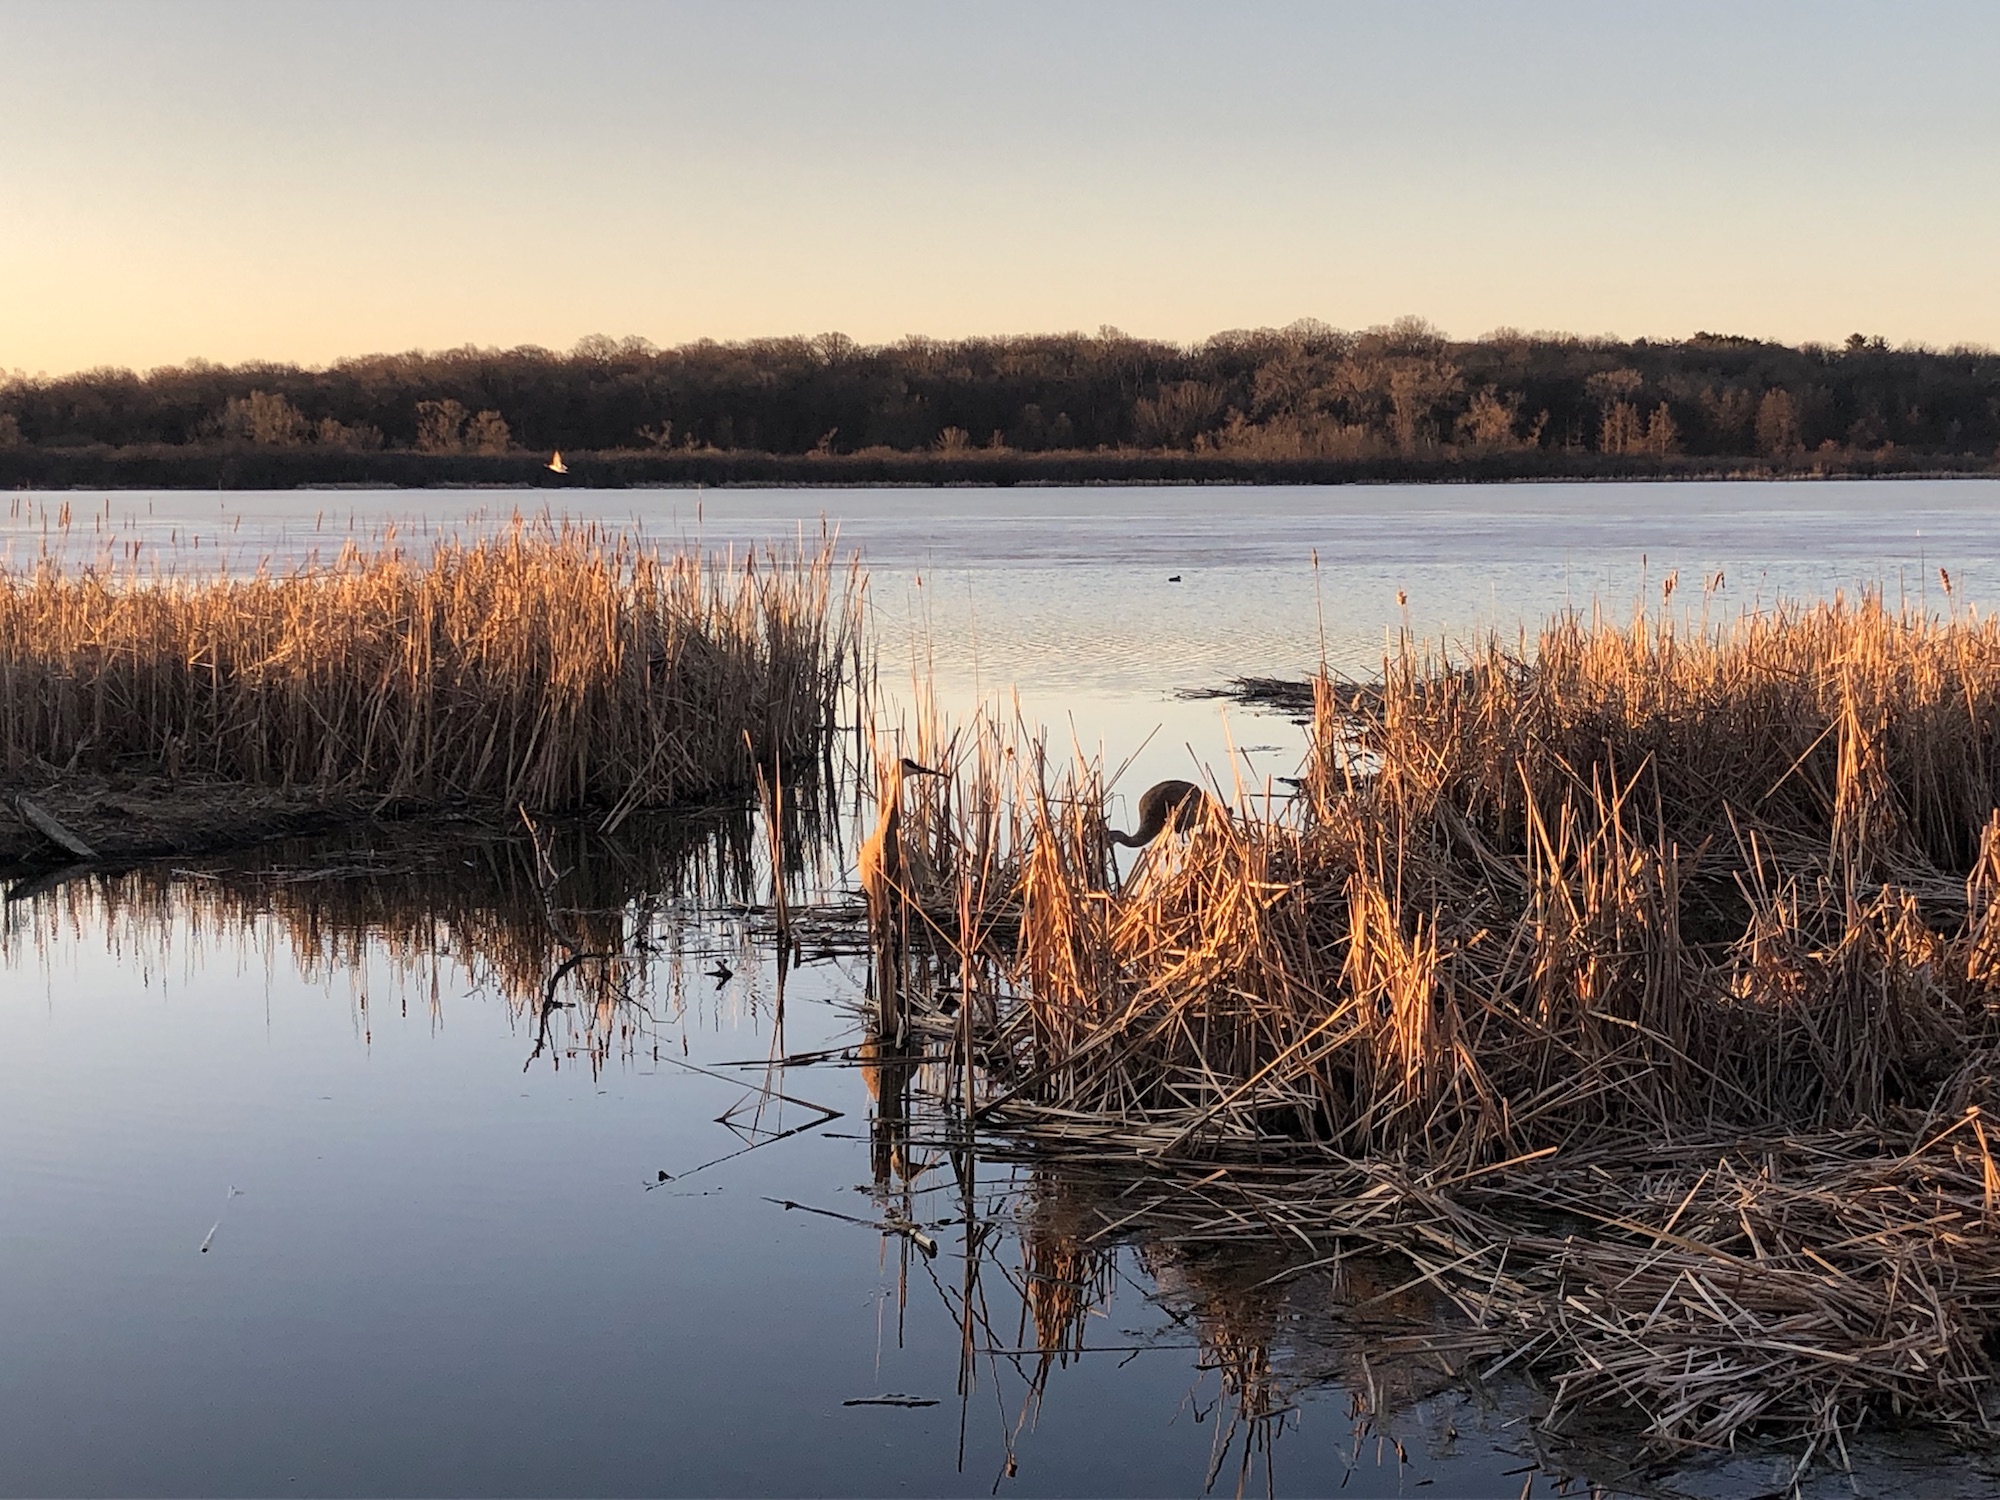 Cattails on Lake Wingra in Madison, Wisconsin on March 25, 2019.